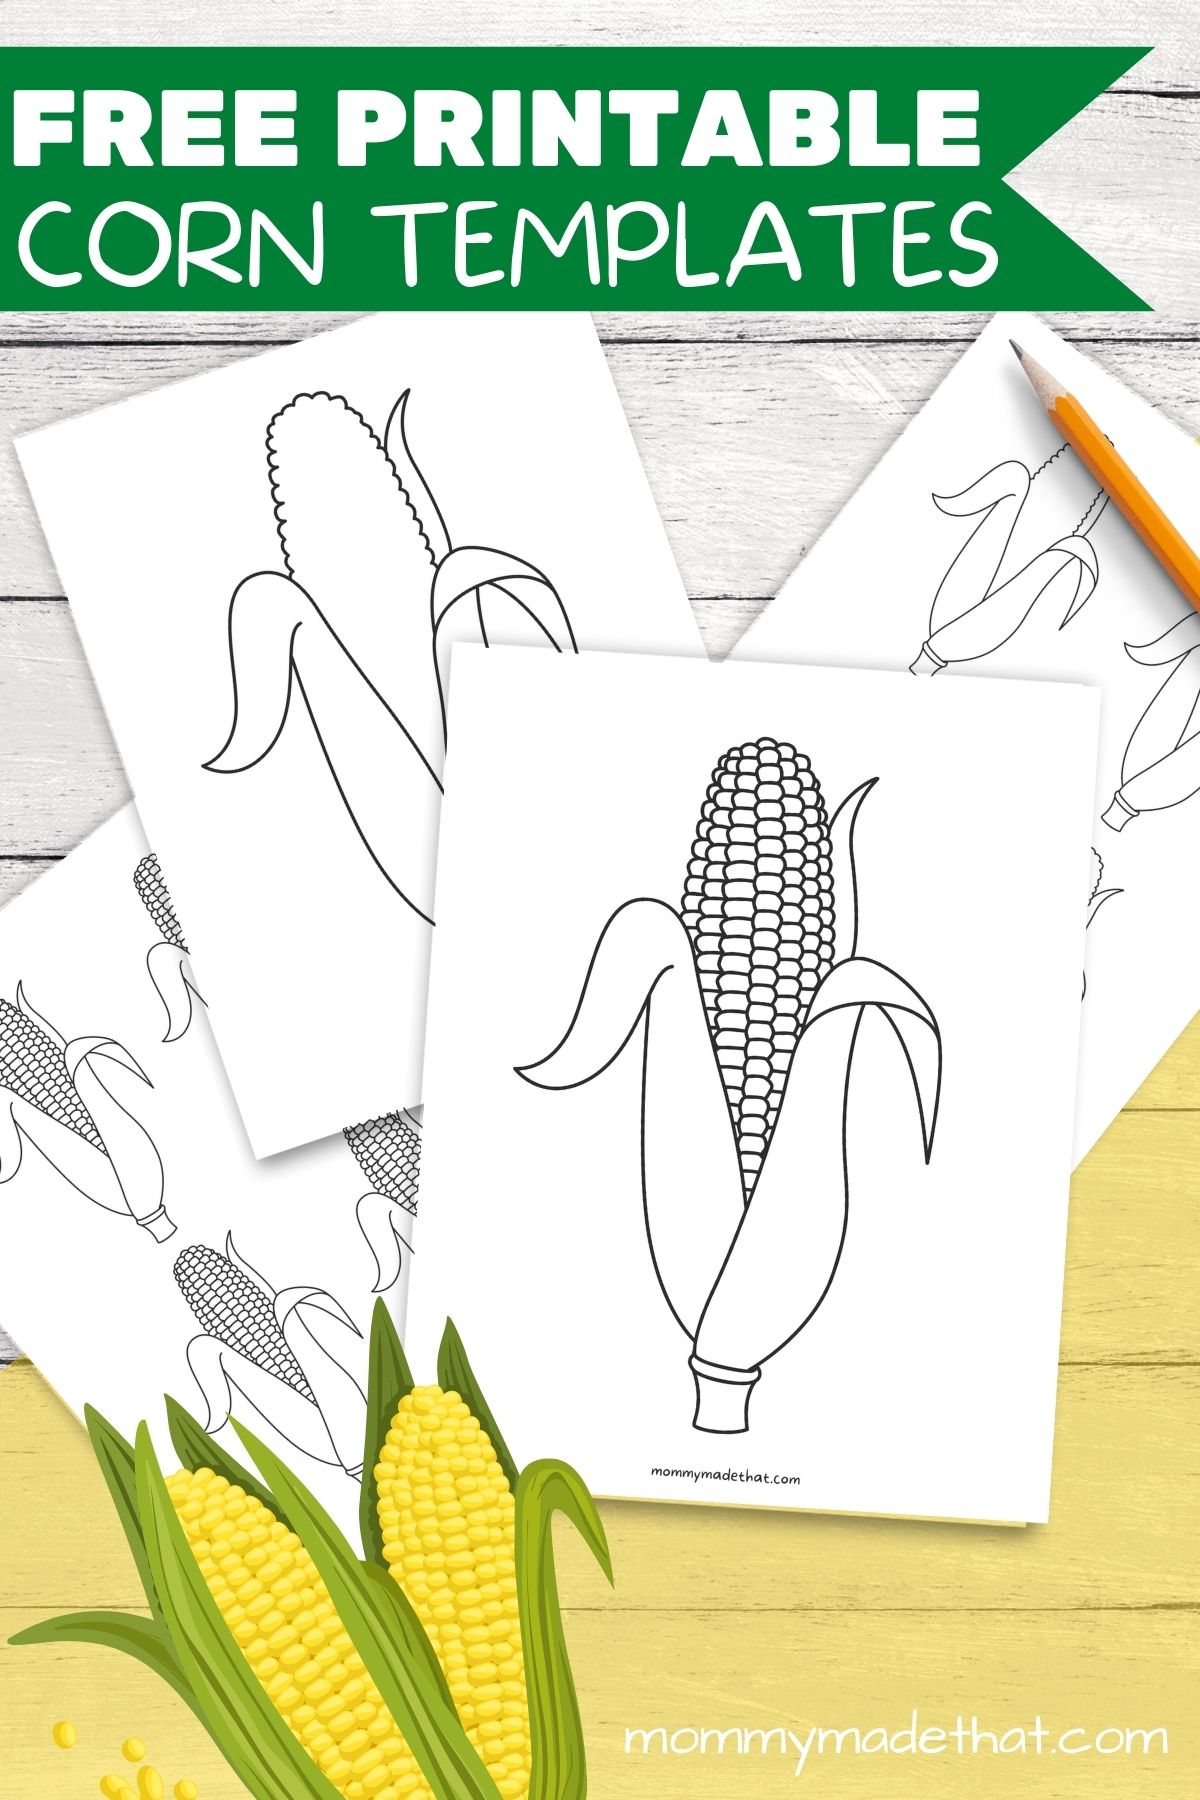 Free printable corn templates outlines for fall crafts